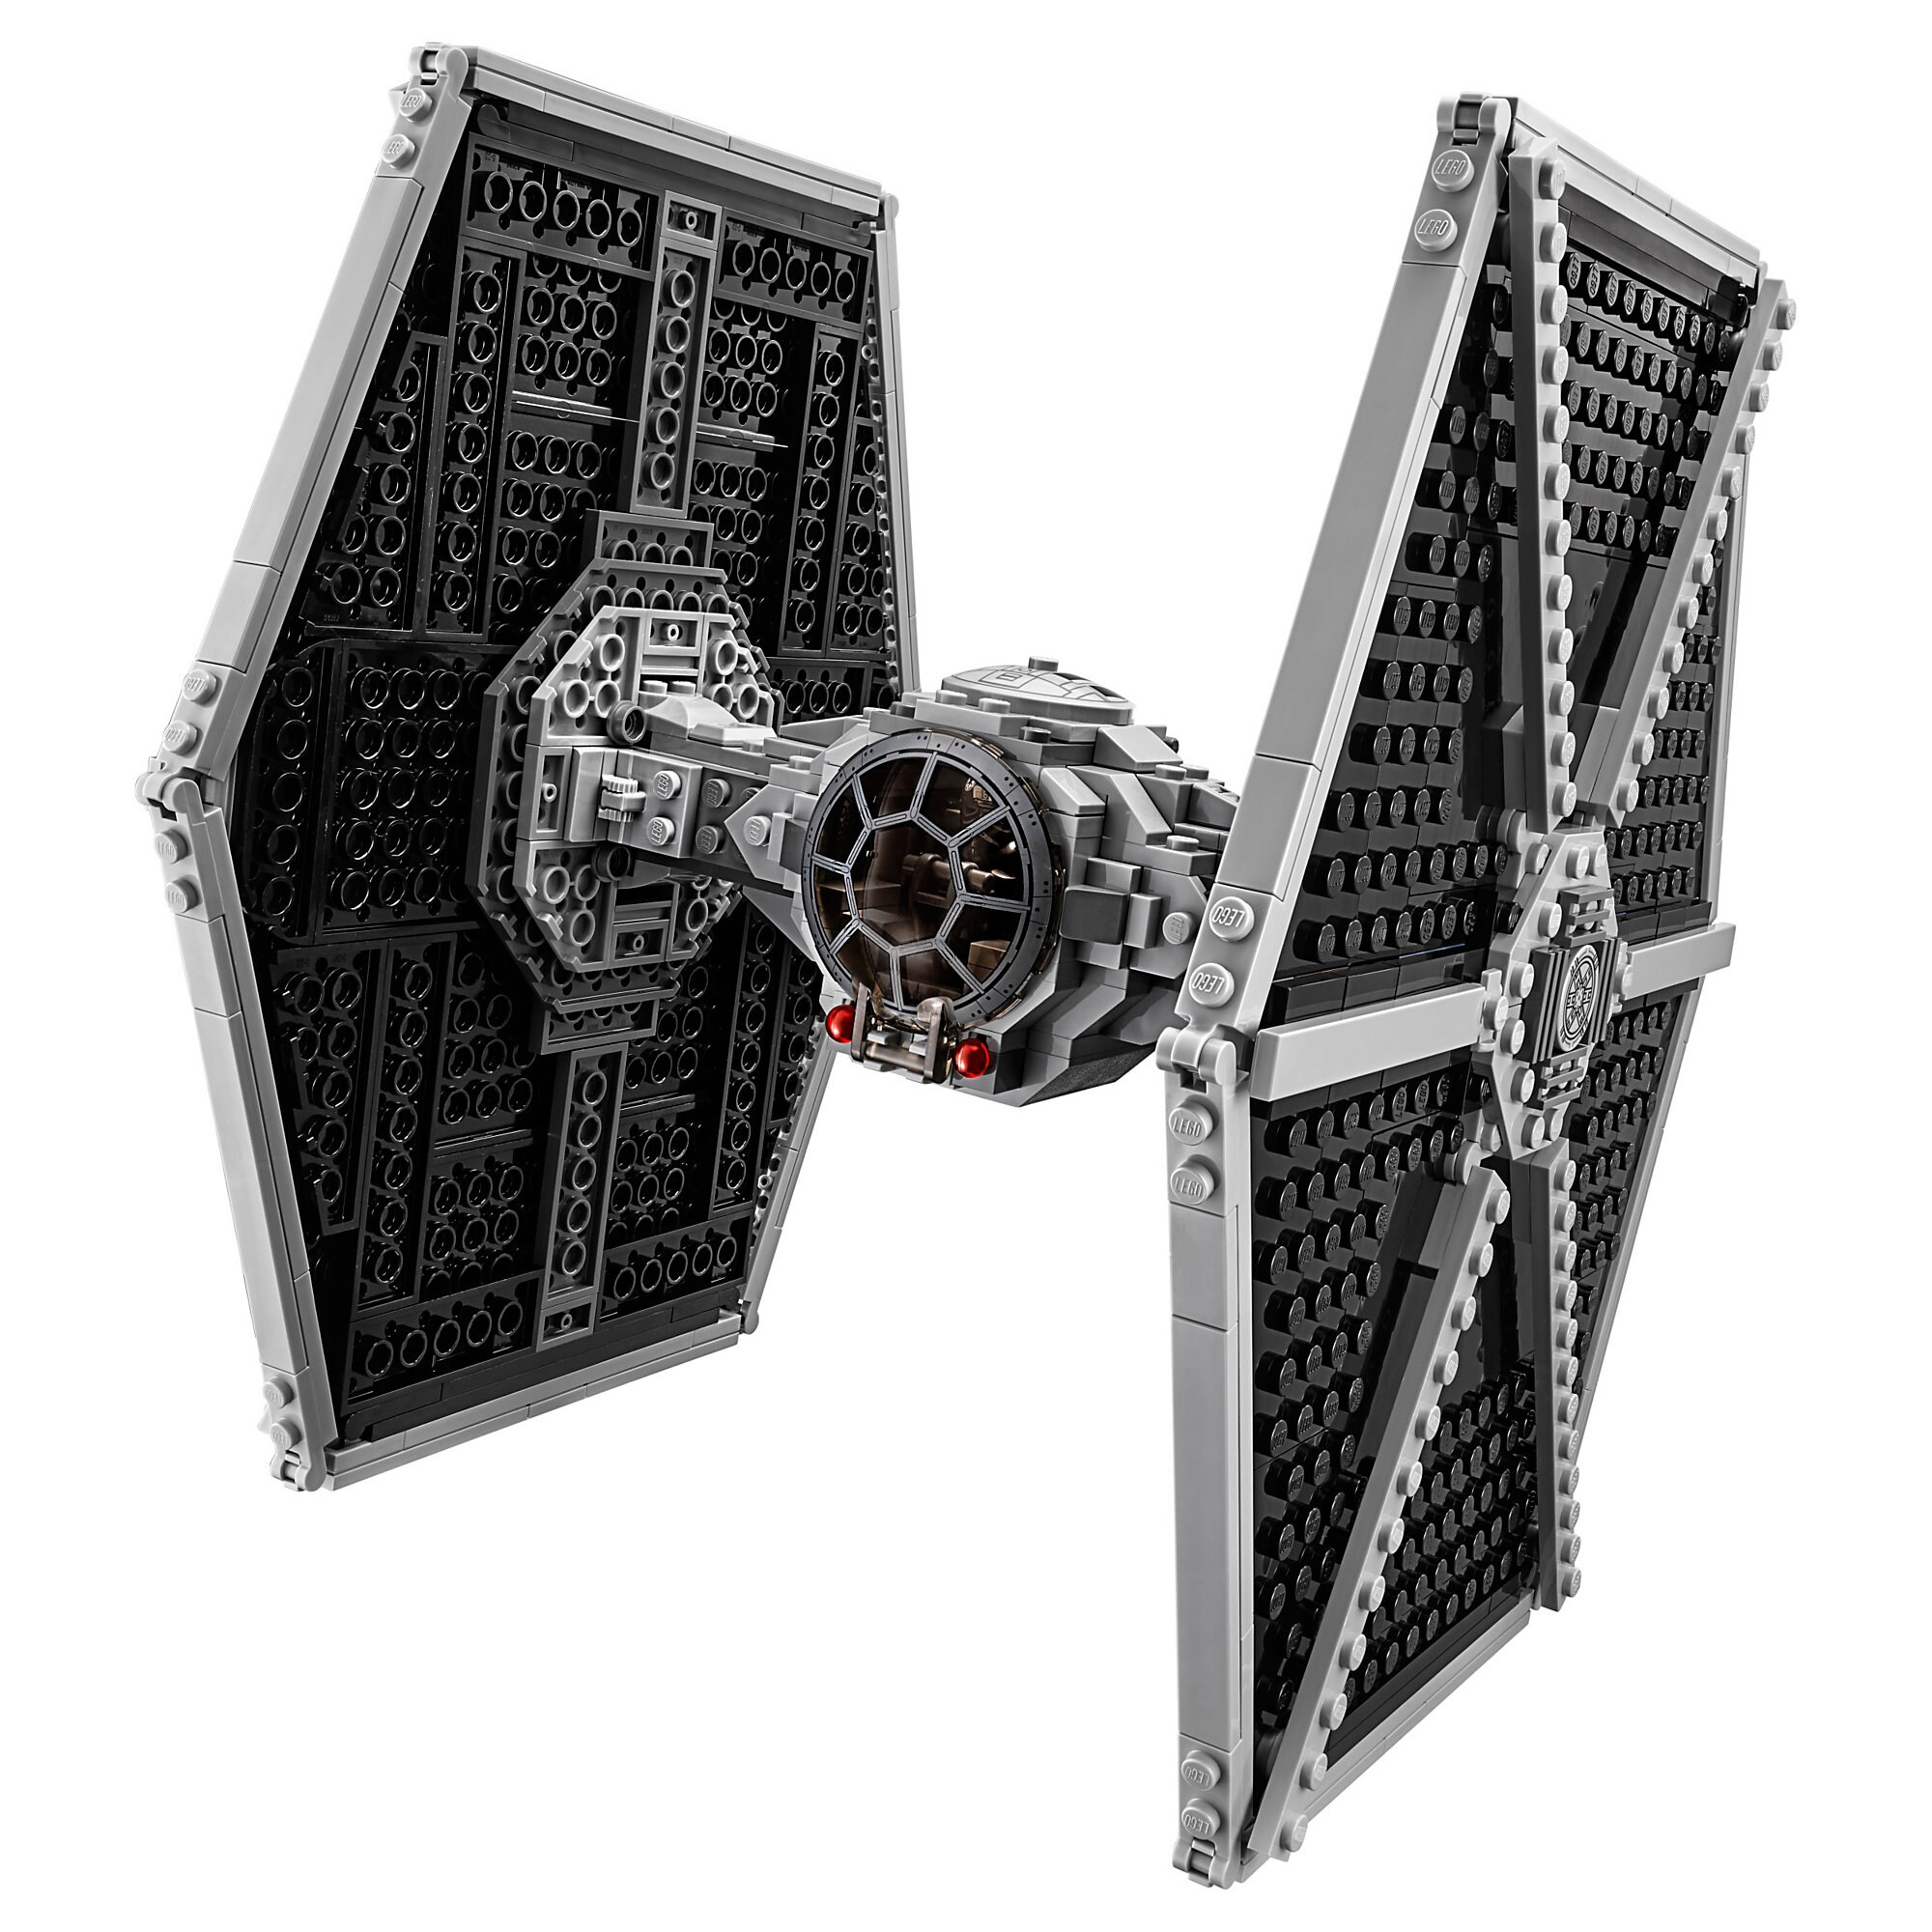 Imperial TIE Fighter Playset by LEGO - Solo: A Star Wars Story